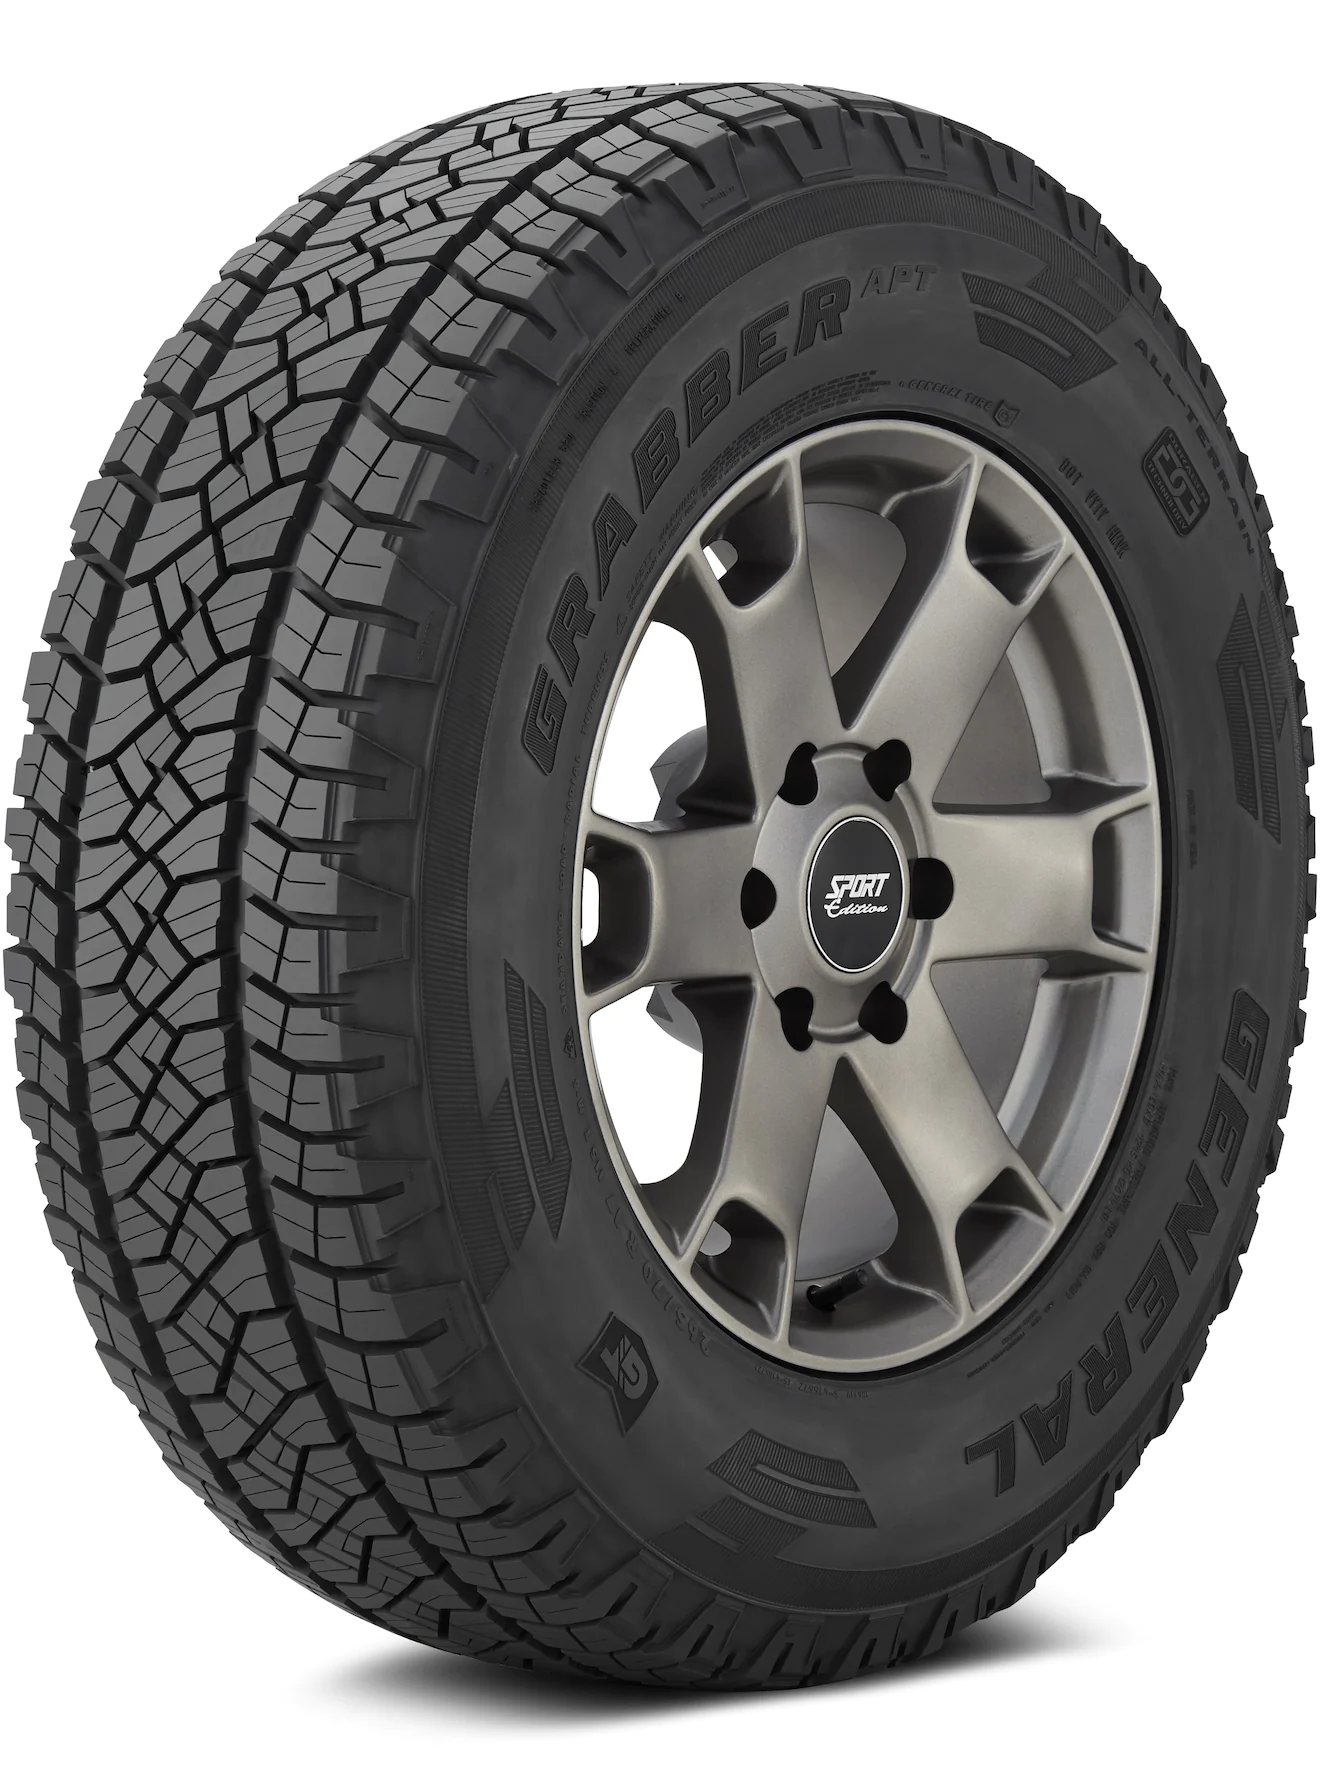 Ford Bronco Some new choices for less aggressive A/T tires 1683600452710